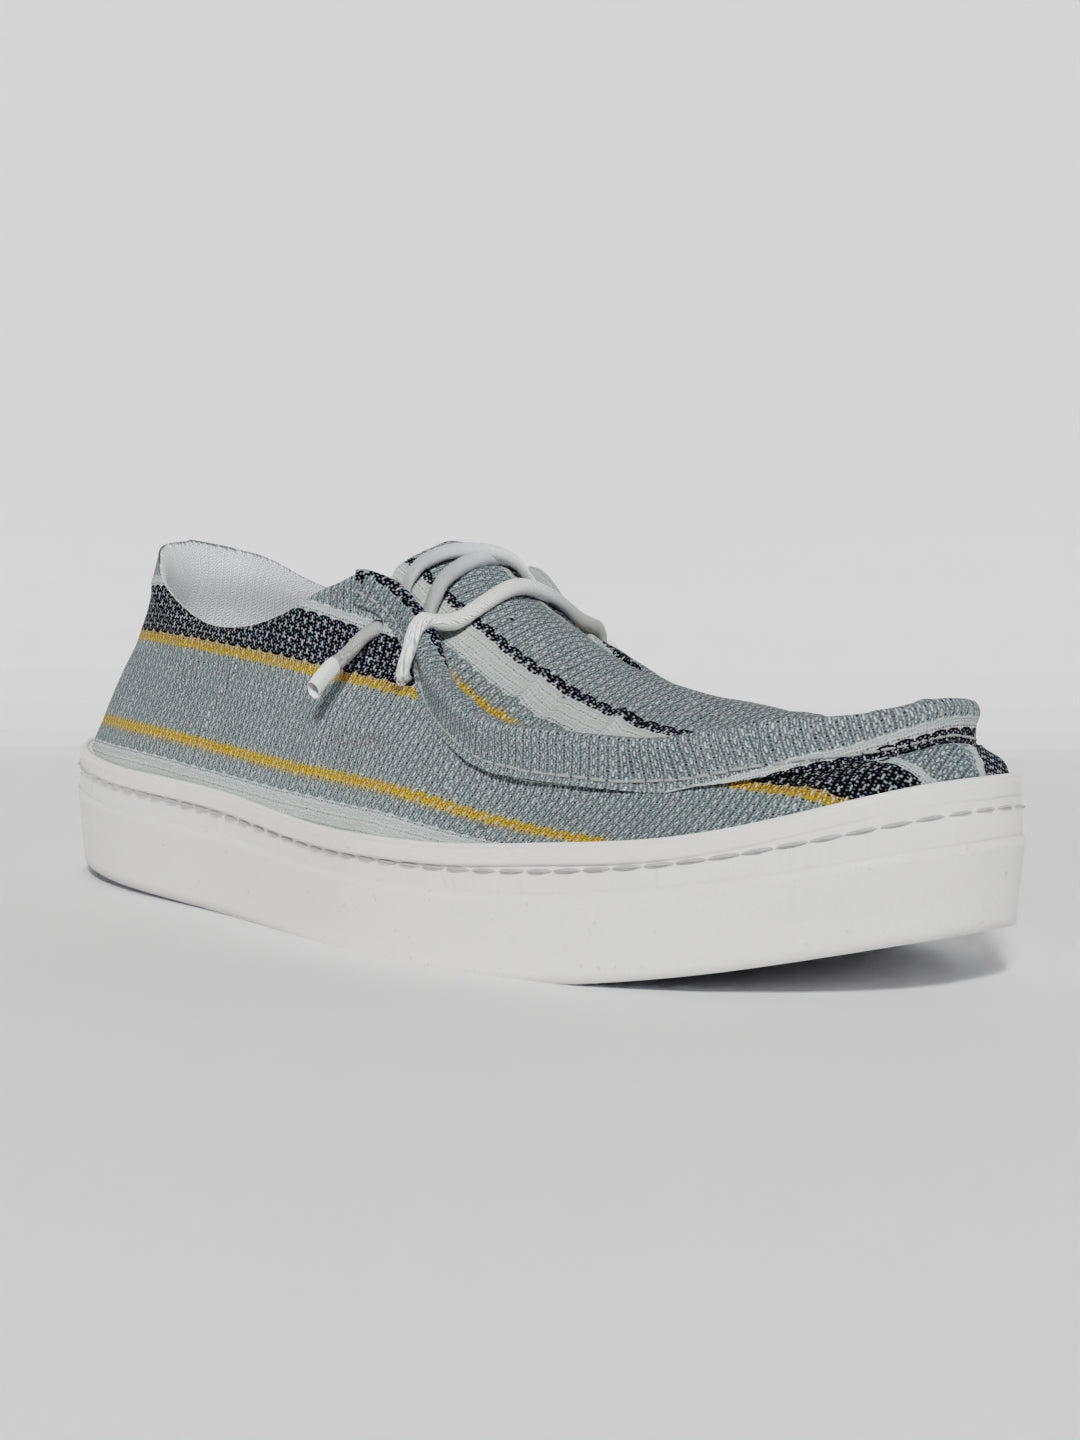 The Luna Grey Woven [Limited Edition]